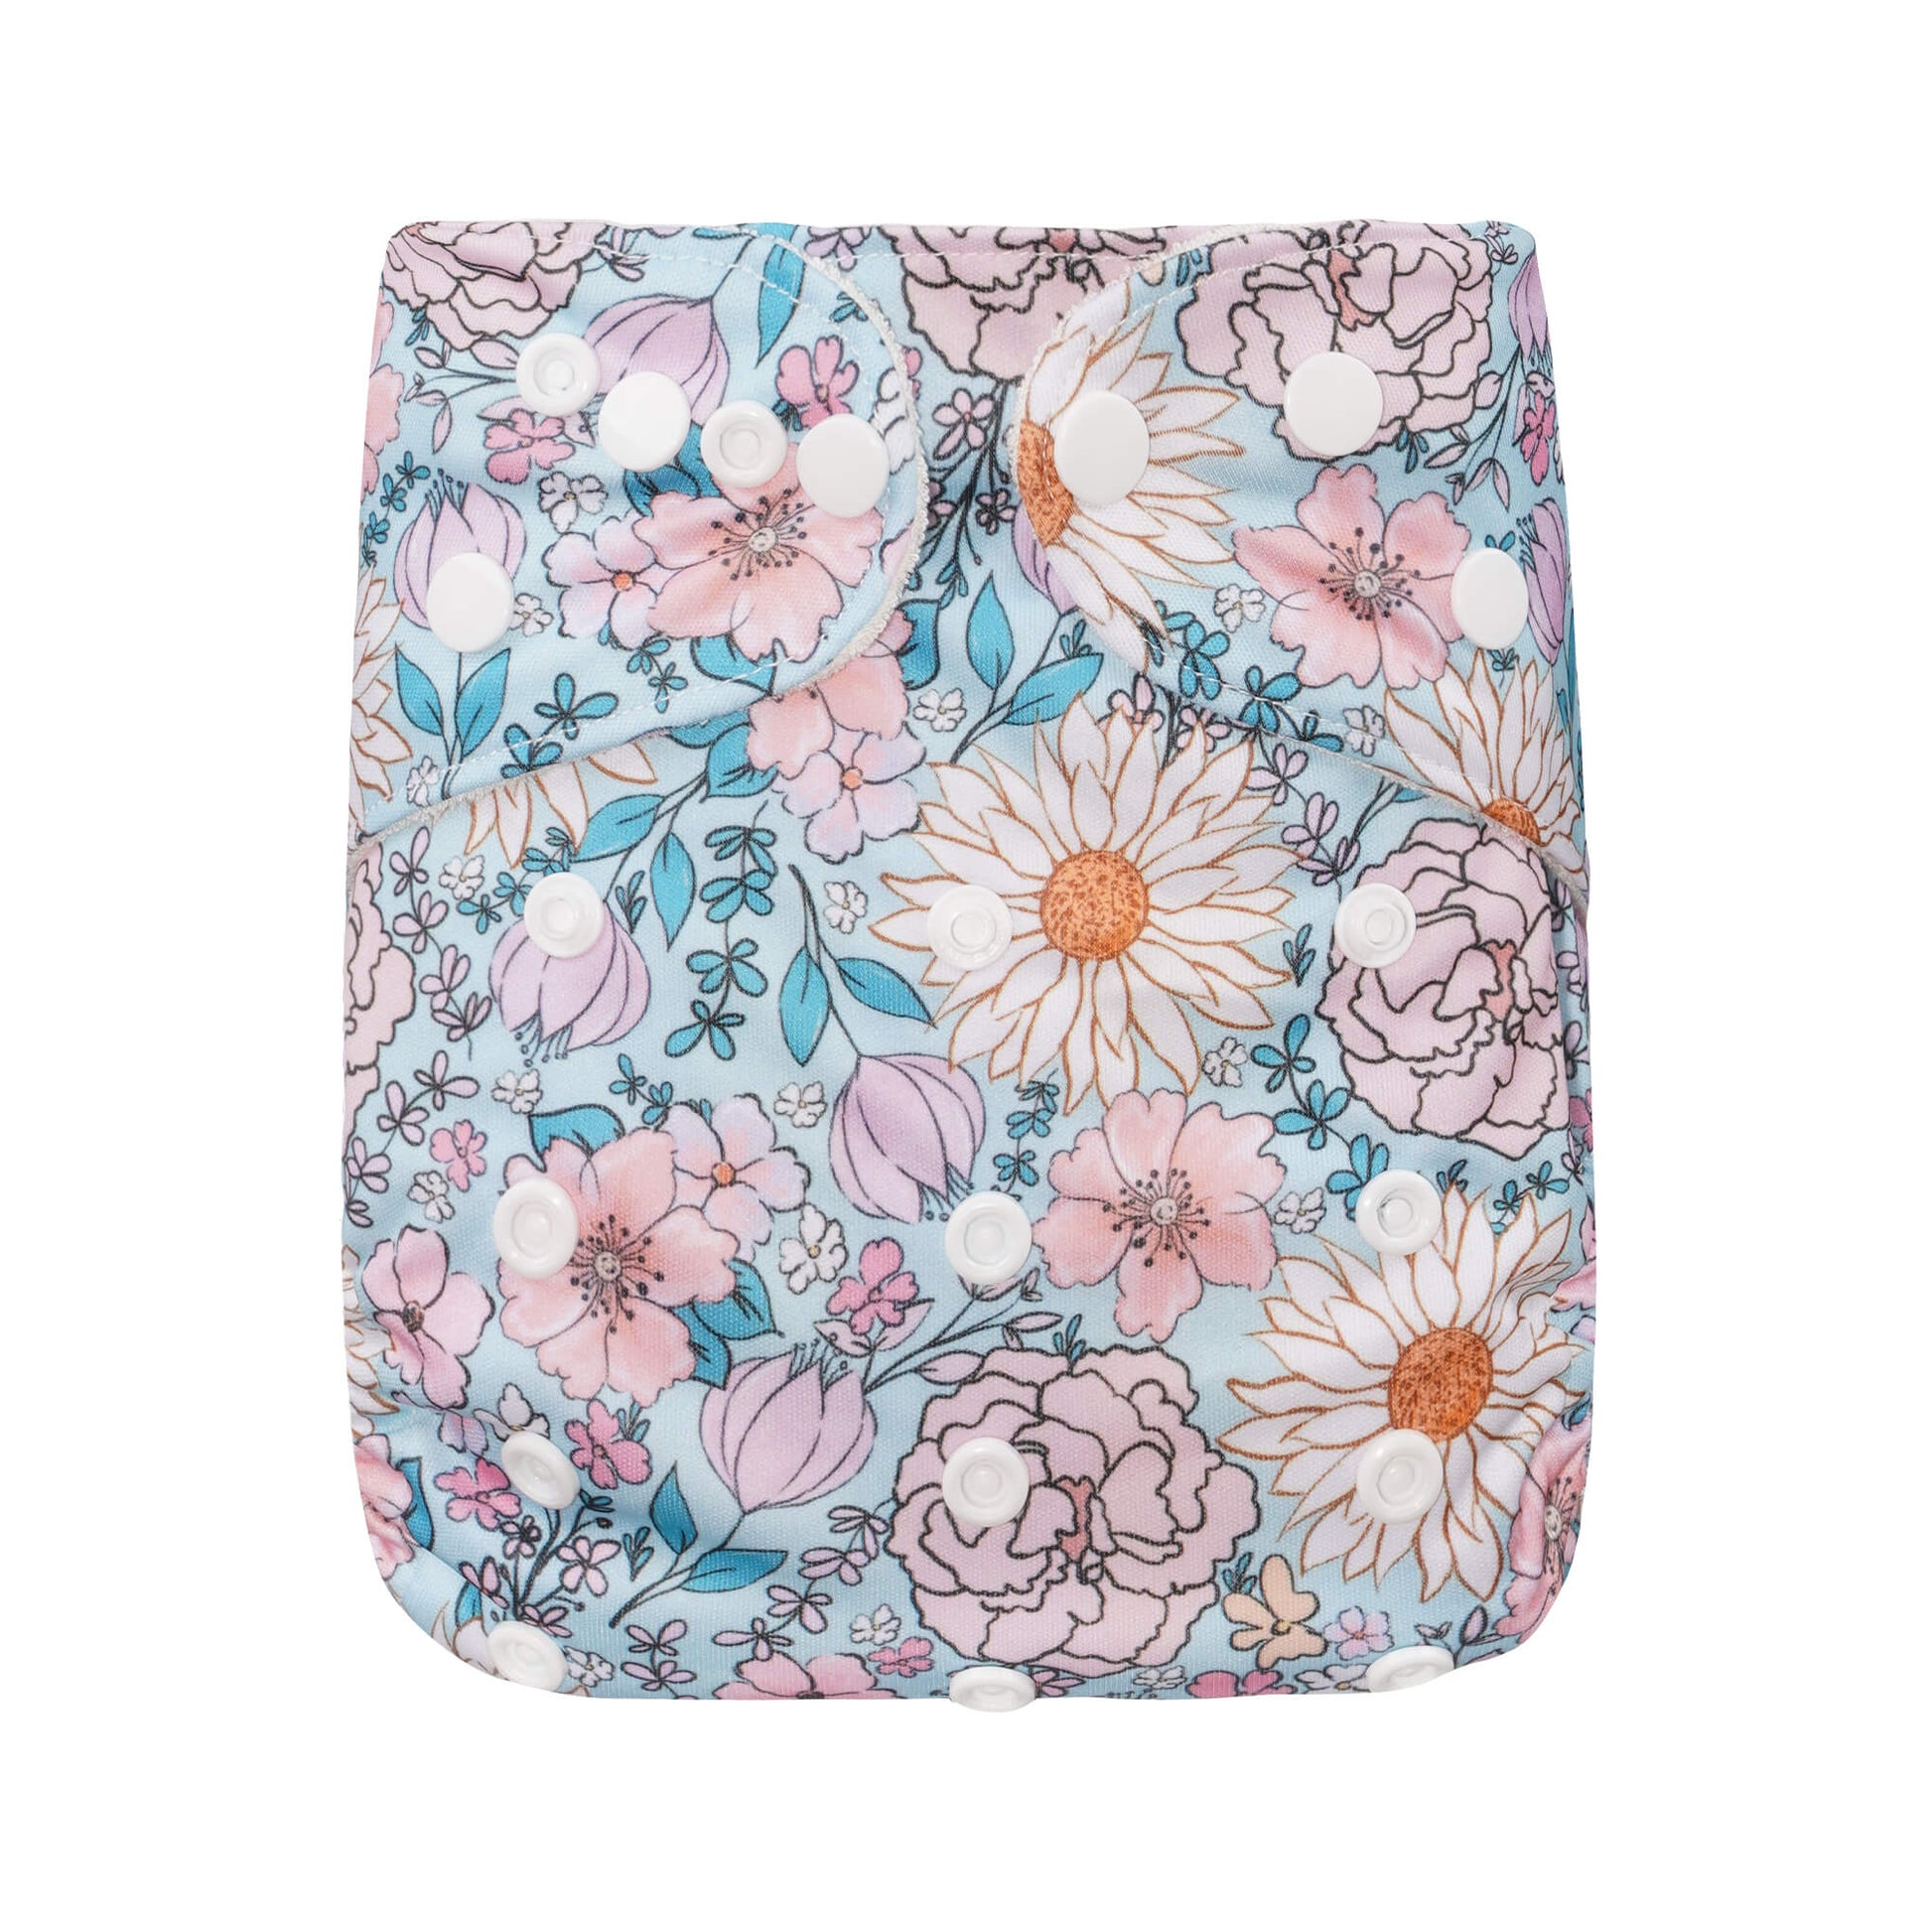 Bear & Moo One Size Fits Most Reusable Cloth Nappy in Boho Floral